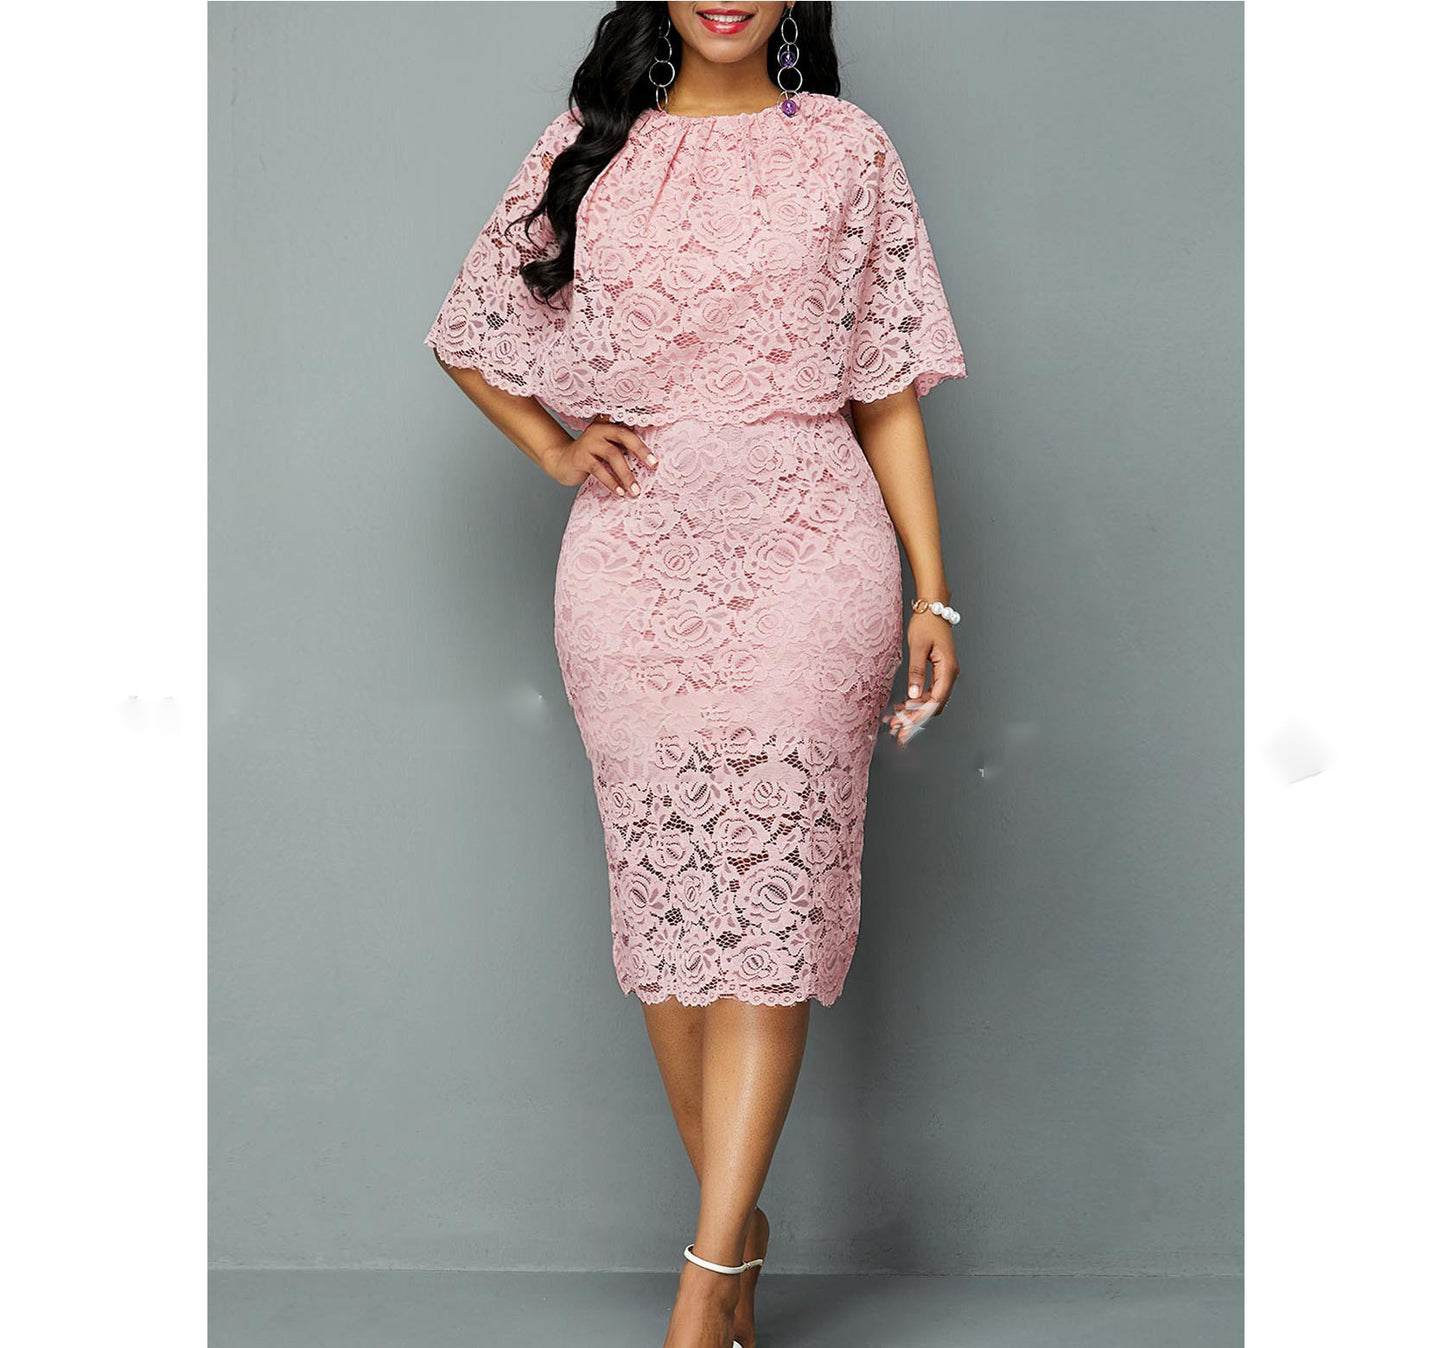 MD African Lace Dresses For Women Fashion New Africa Sexy Wedding Outfit 4XL 5XL Plus Size Maxi Dress Dashiki Ankara Pink Robe